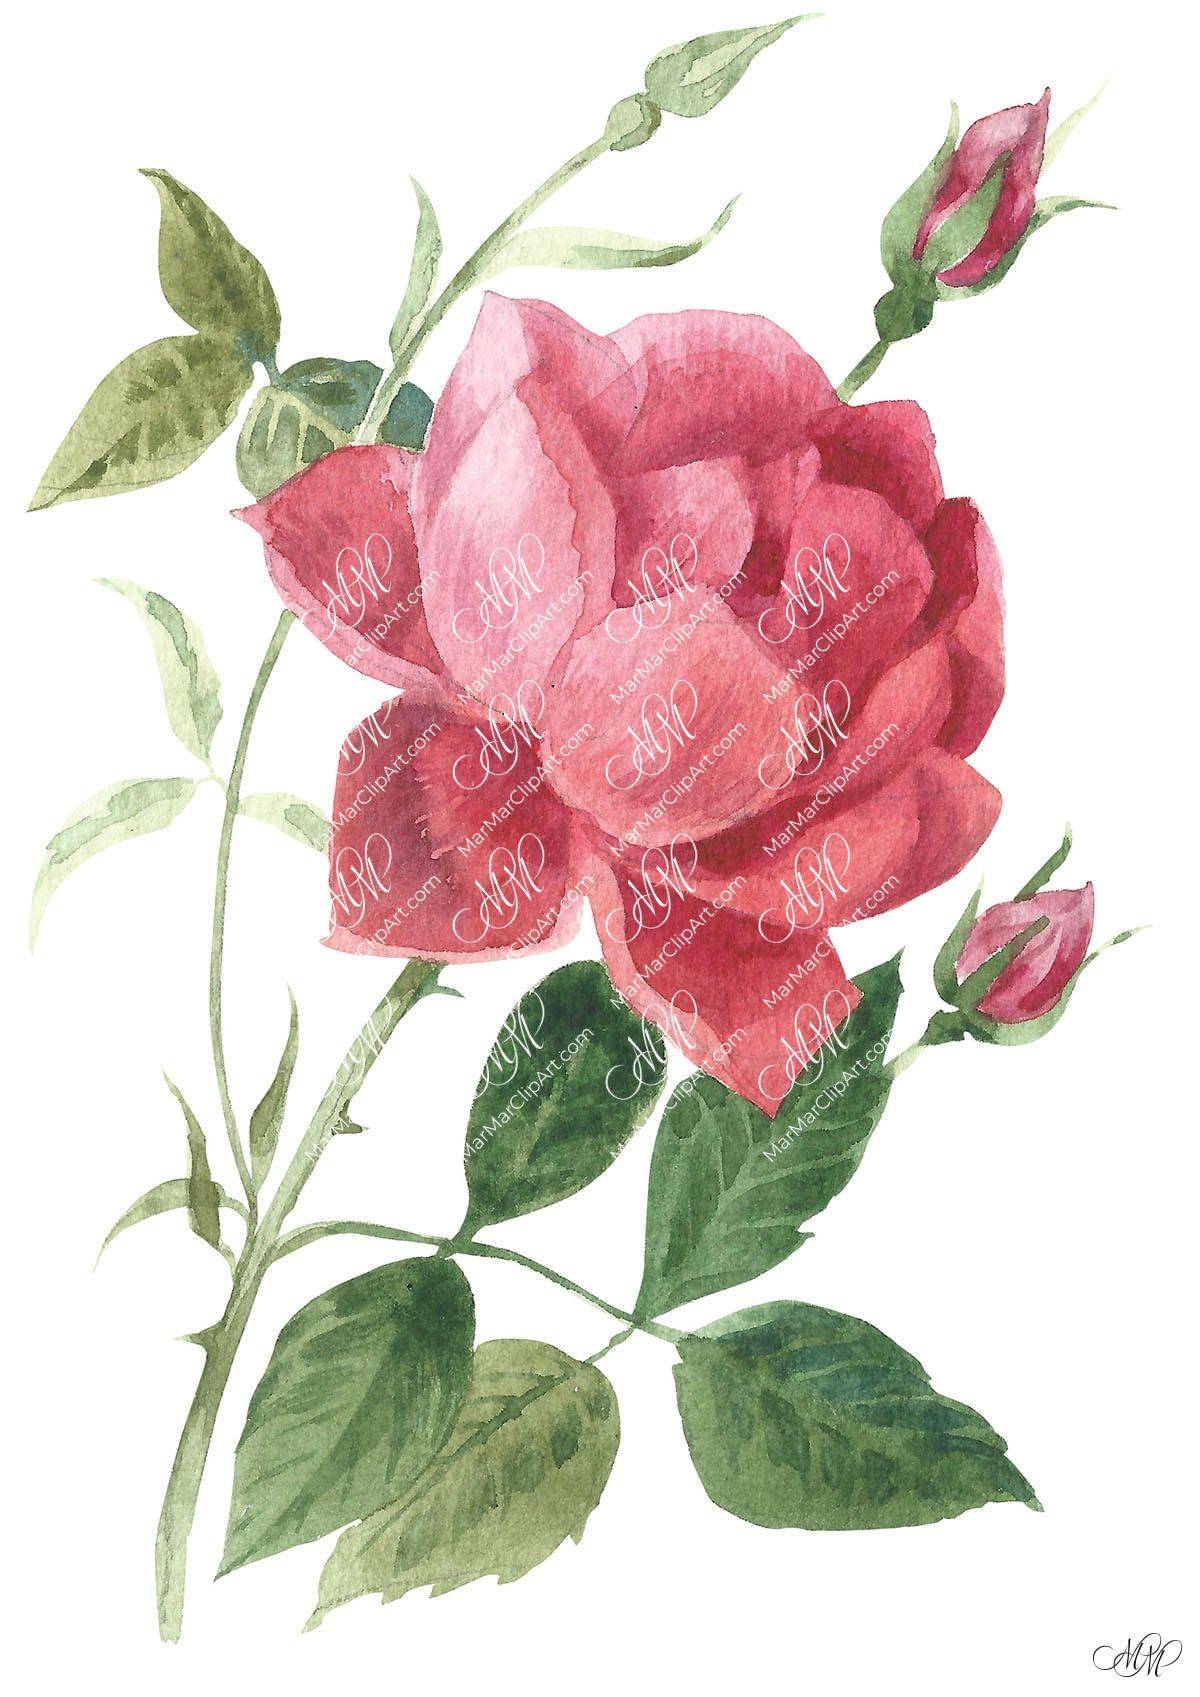 Rose. Isolated on white background with work path. Watercolor. 20x29 cm. Rose.jpg 3Mb. RGB. 300 px. Instant download.